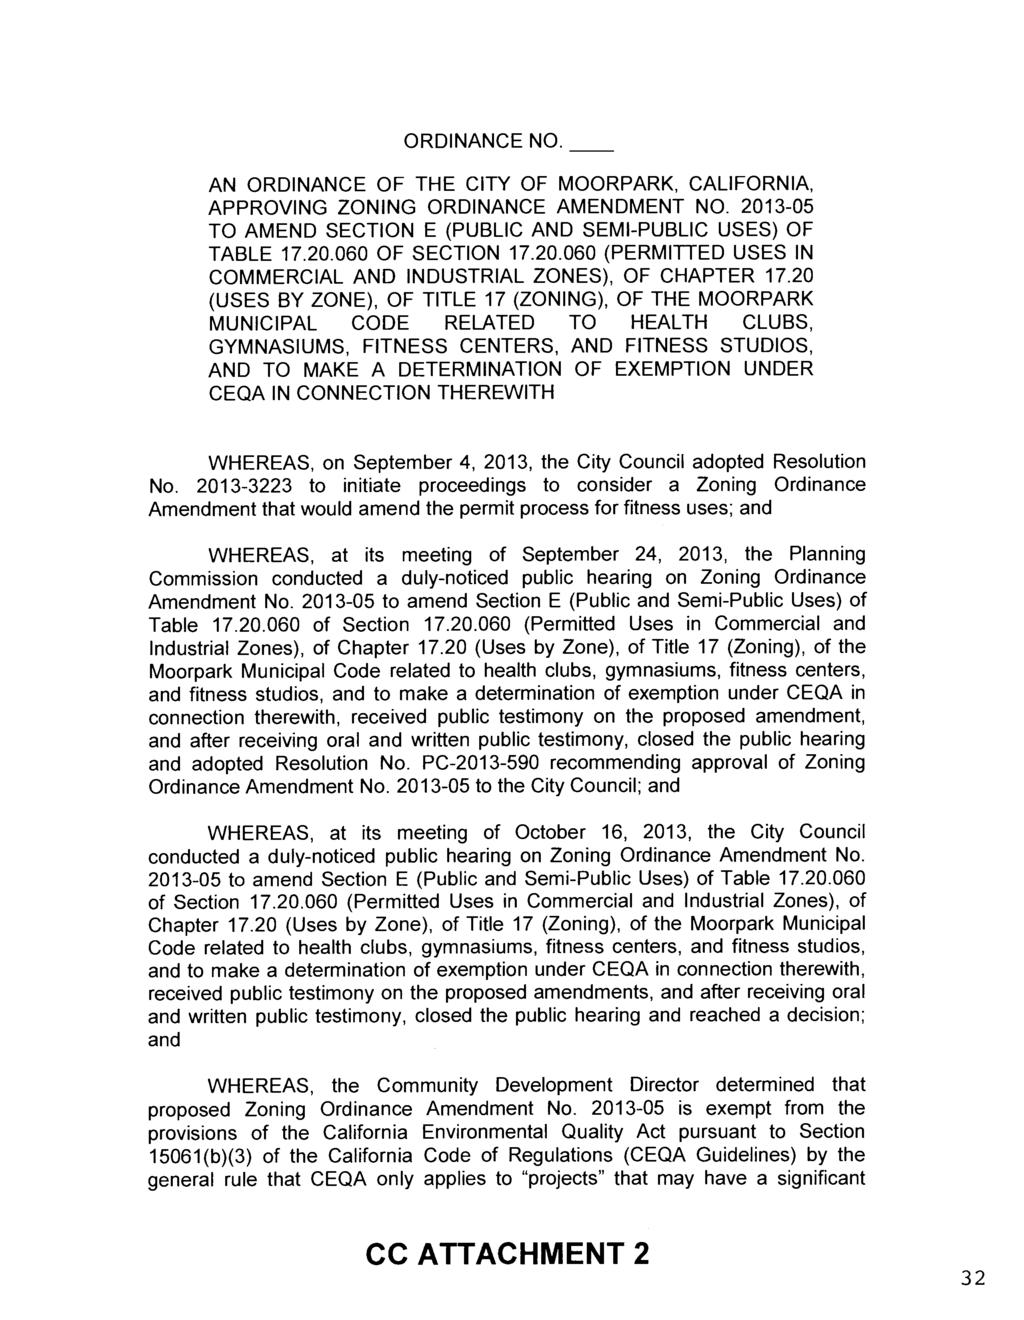 ORDINANCE NO. AN ORDINANCE OF THE CITY OF MOORPARK, CALIFORNIA, APPROVING ZONING ORDINANCE AMENDMENT NO. 2013-05 TO AMEND SECTION E (PUBLIC AND SEMI-PUBLIC USES) OF TABLE 17.20.060 OF SECTION 17.20.060 (PERMITIED USES IN COMMERCIAL AND INDUSTRIAL ZONES}, OF CHAPTER 17.